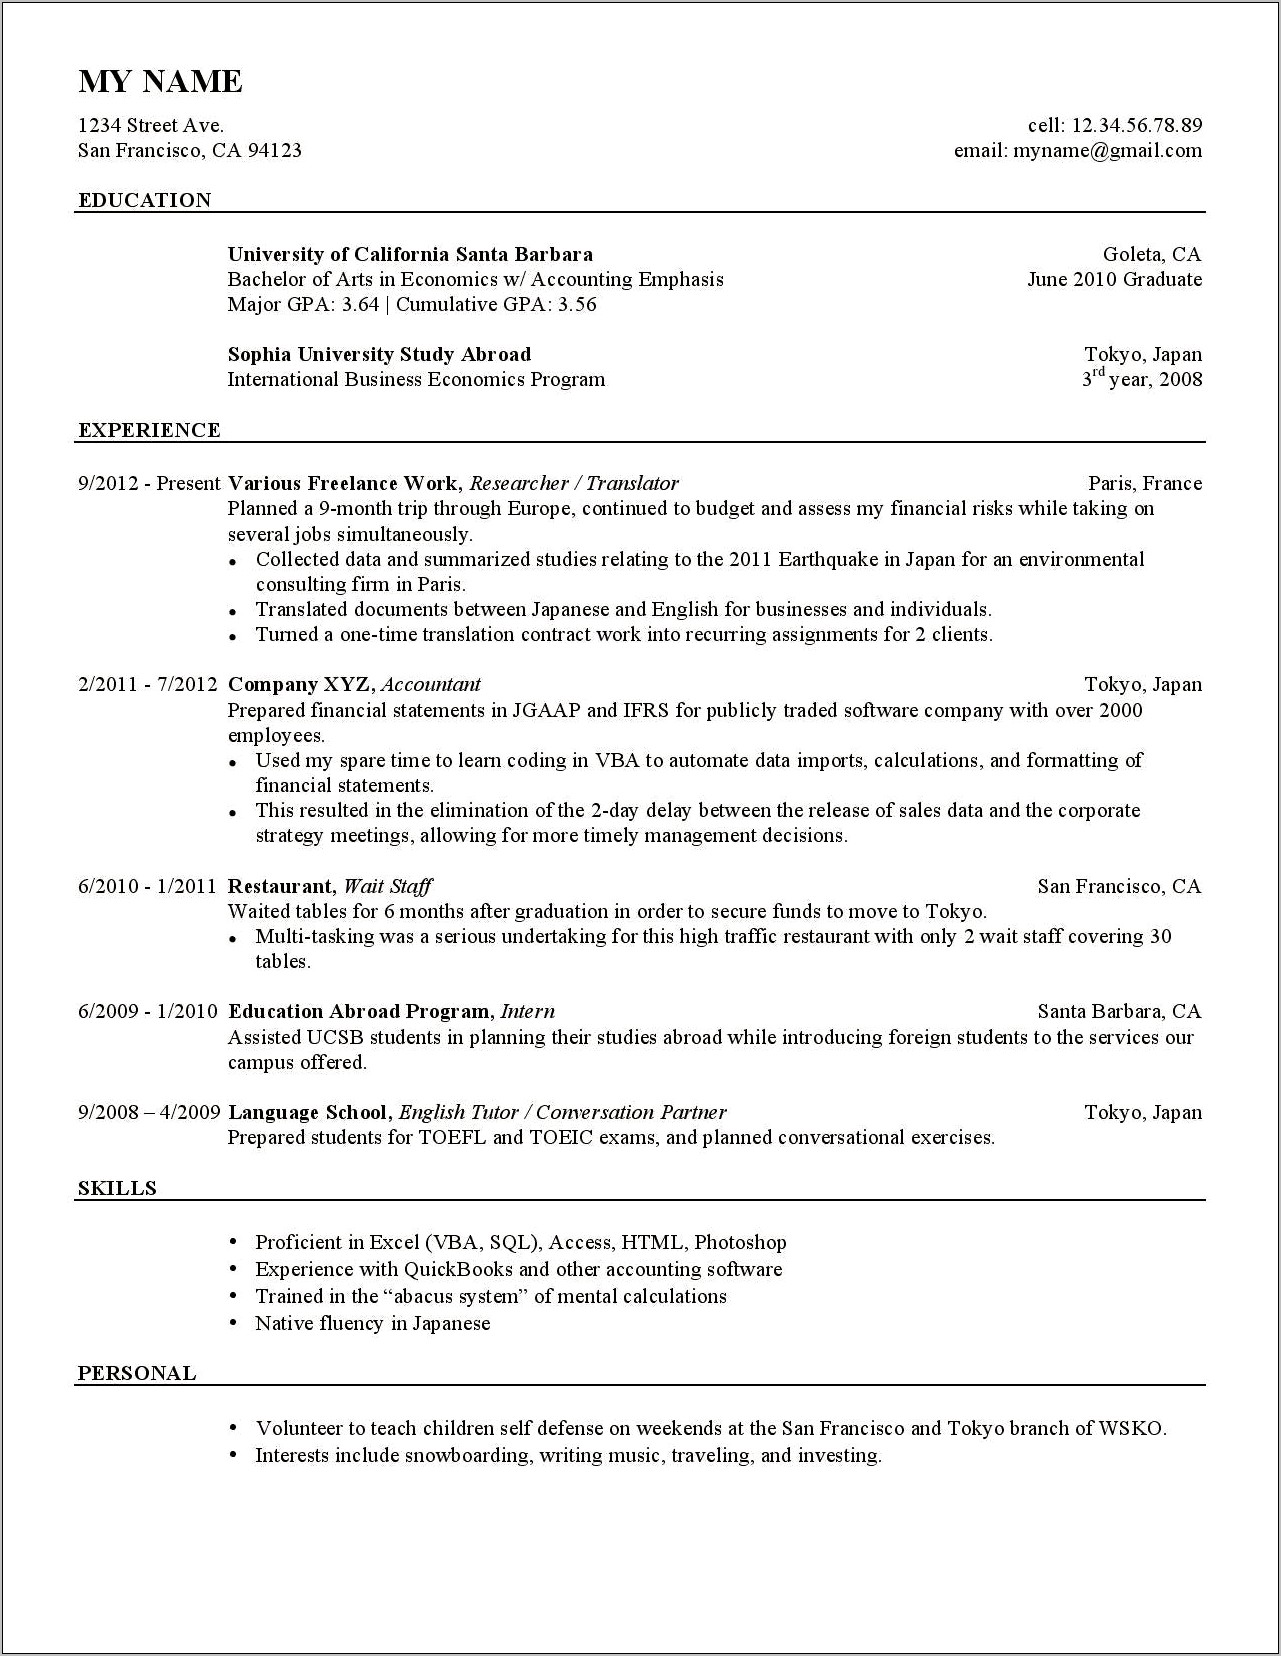 Does Study Abroad Look Good On Resume Reddit